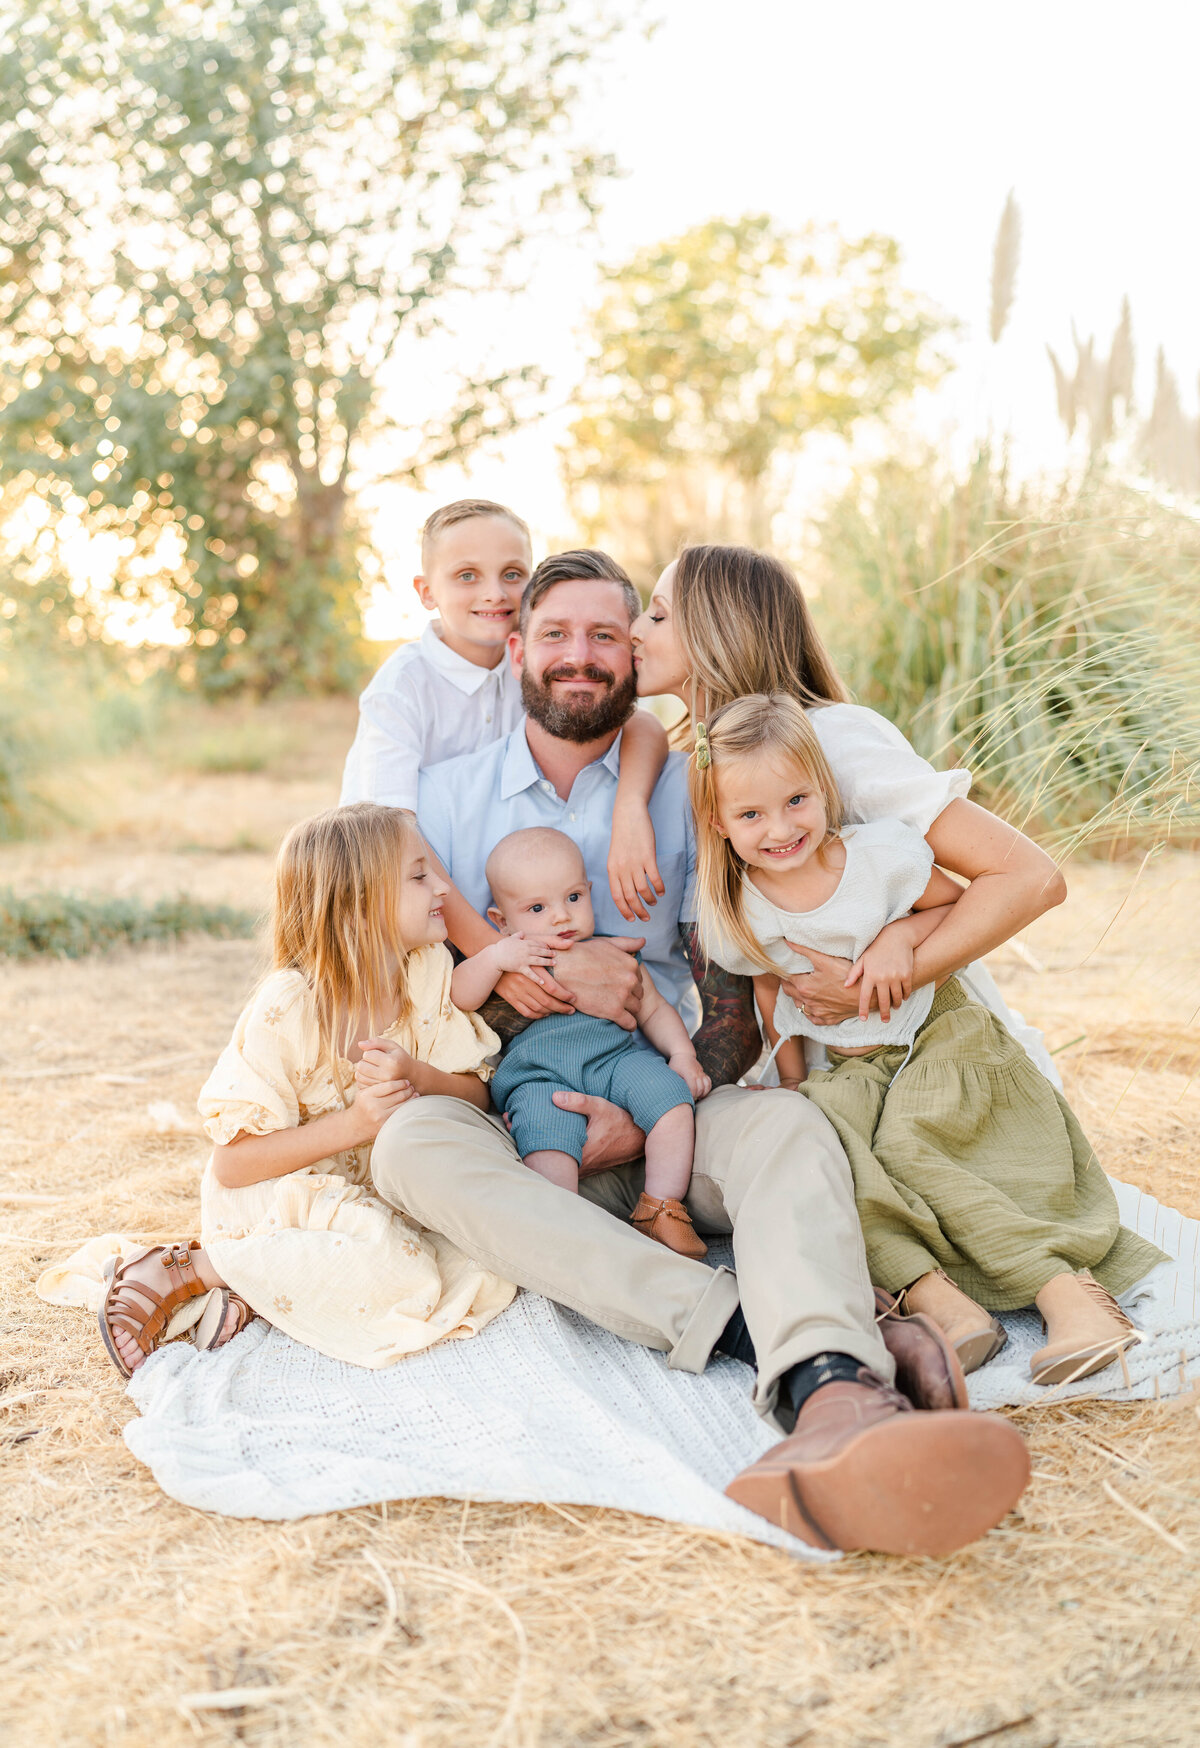 A family sits together lovingly in a pampas grass field dressed in muted tones of yellows, tans, and greens photographed by Bay Area Photographer, Light Livin Photography.